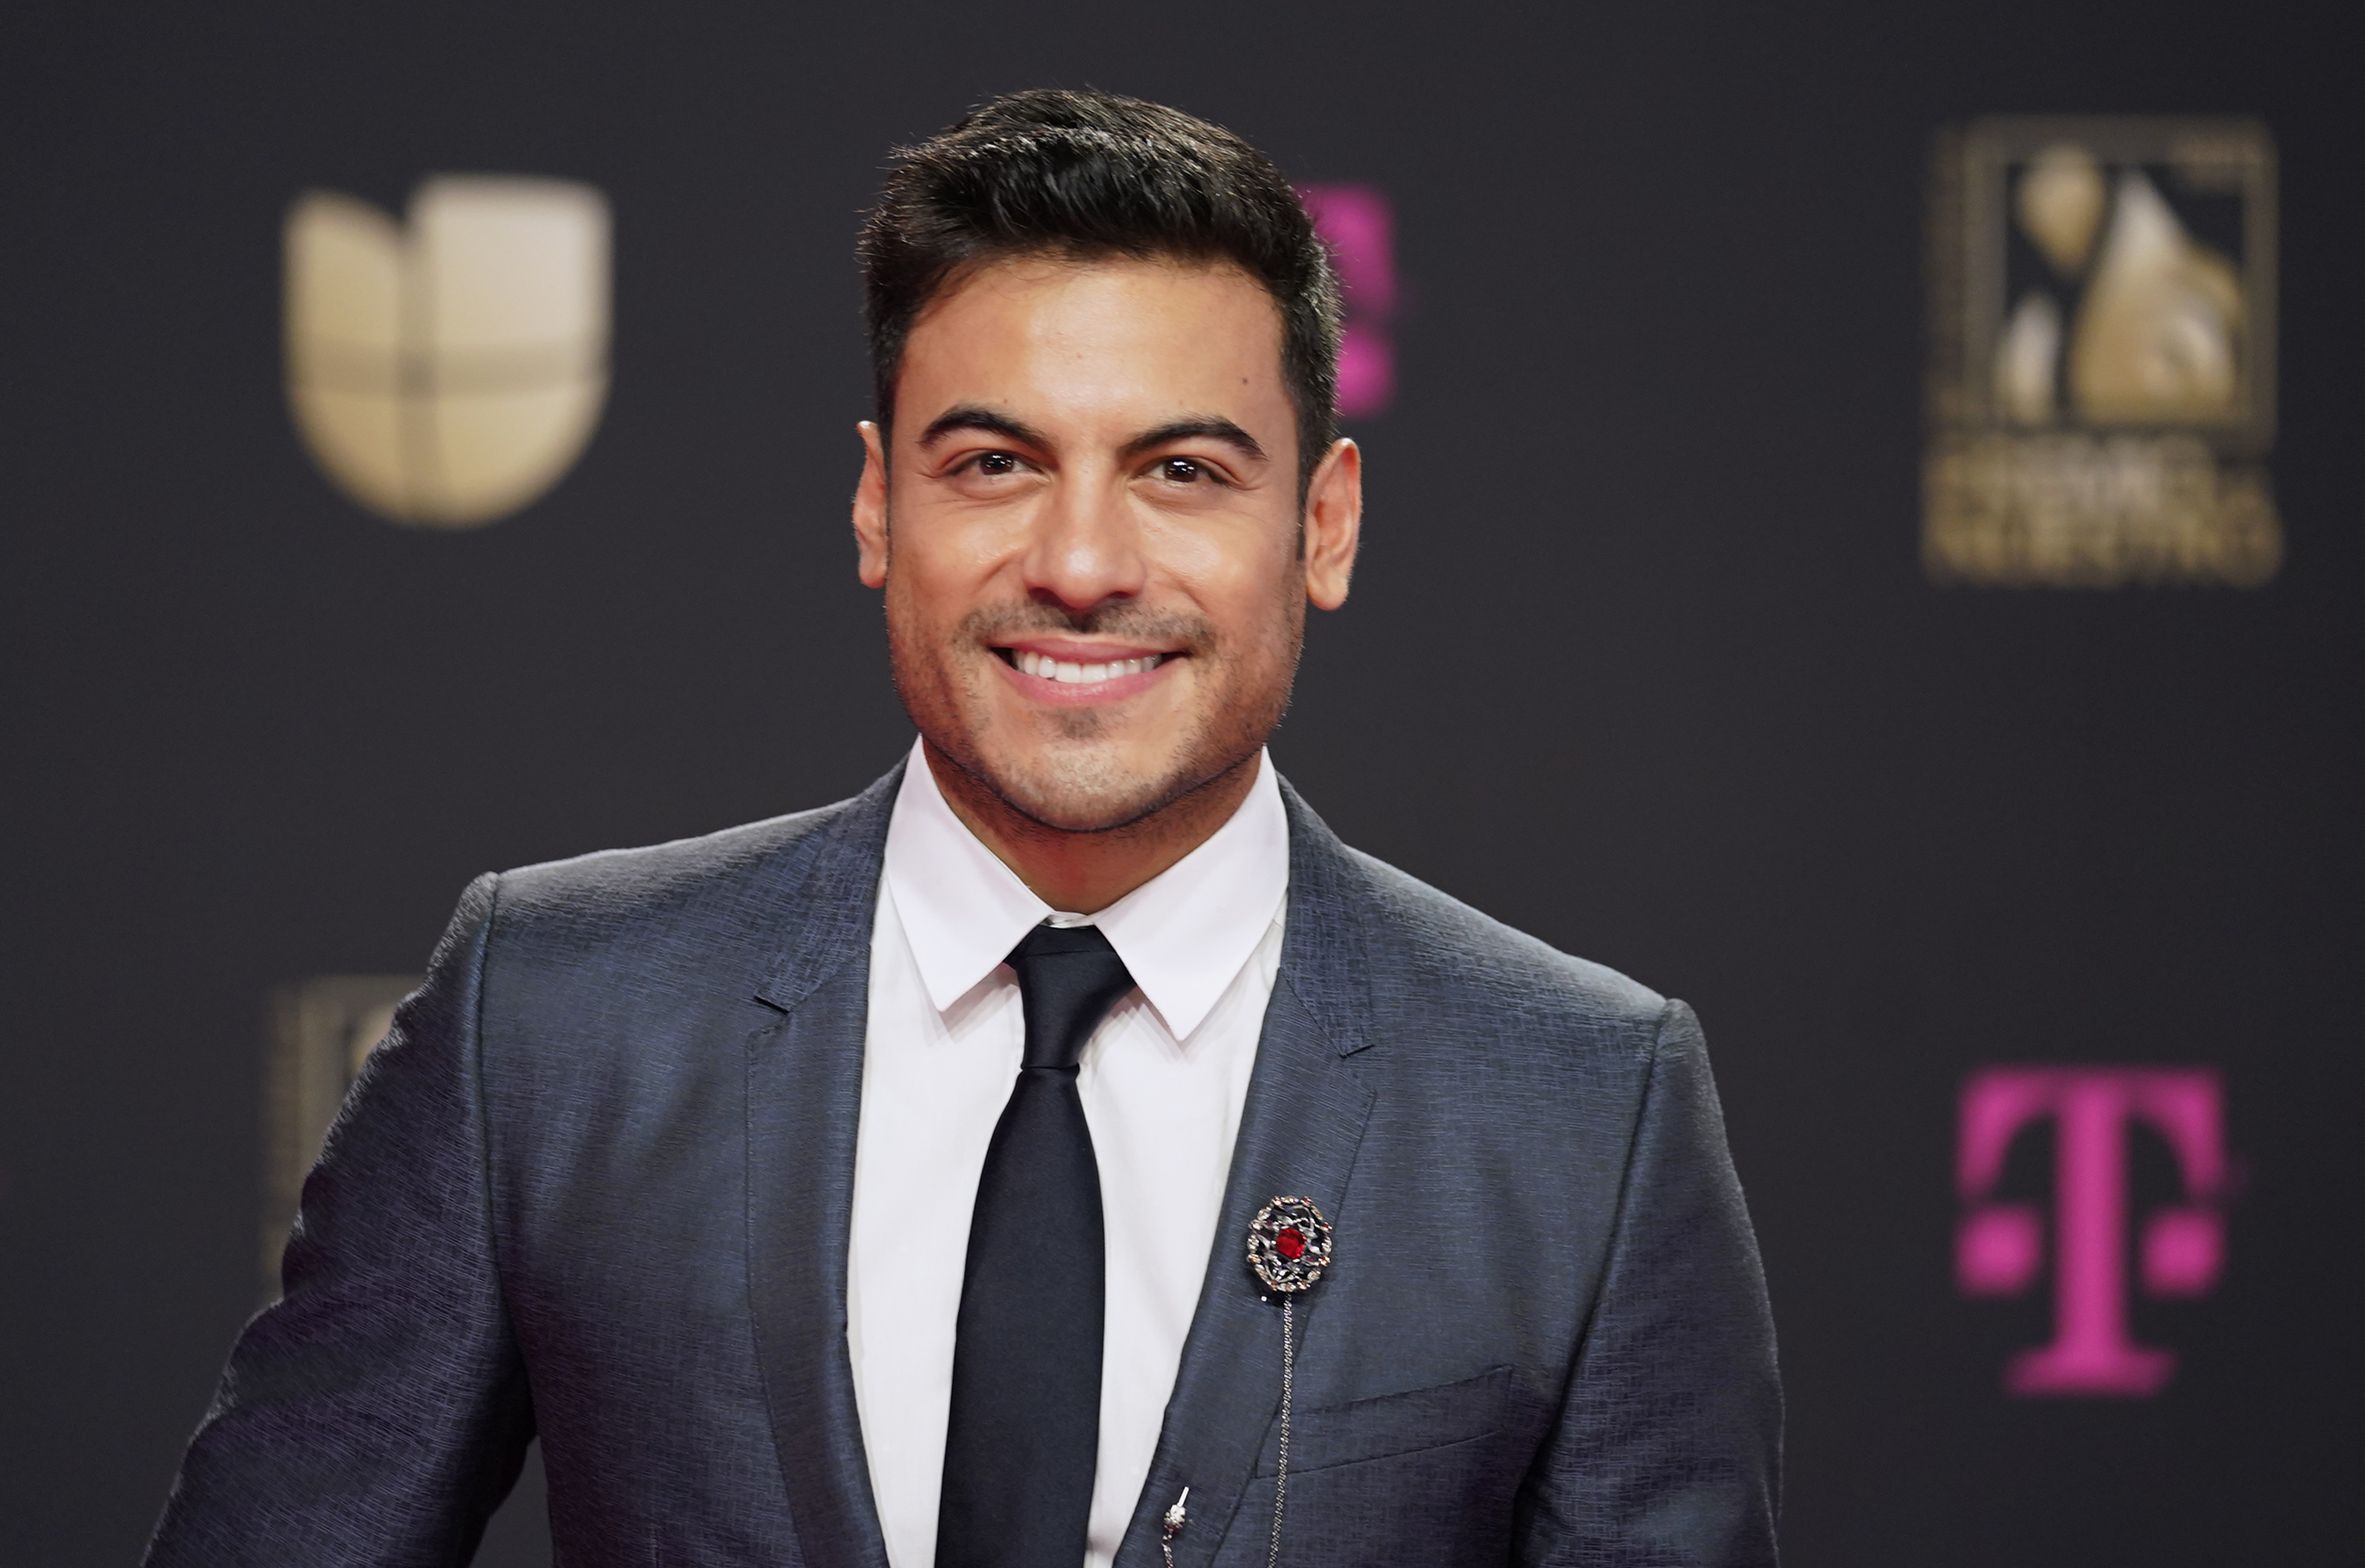 How did Carlos Rivera spend the millions he earned in The Academy - Infobae